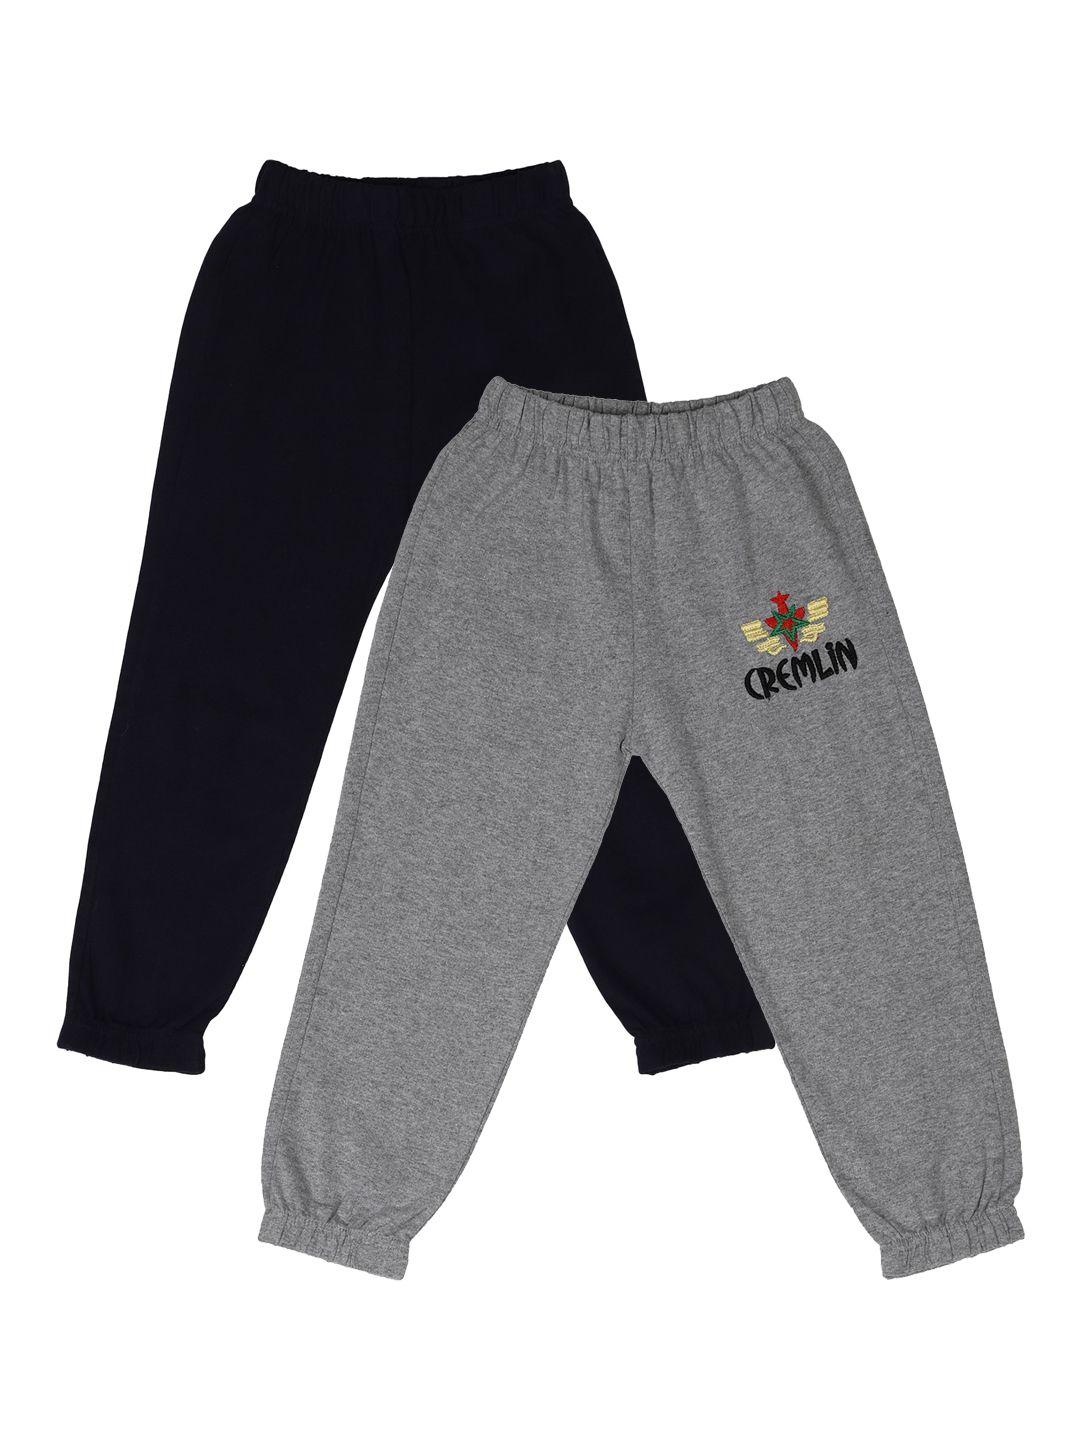 cremlin clothing kids pack of 2 track pants